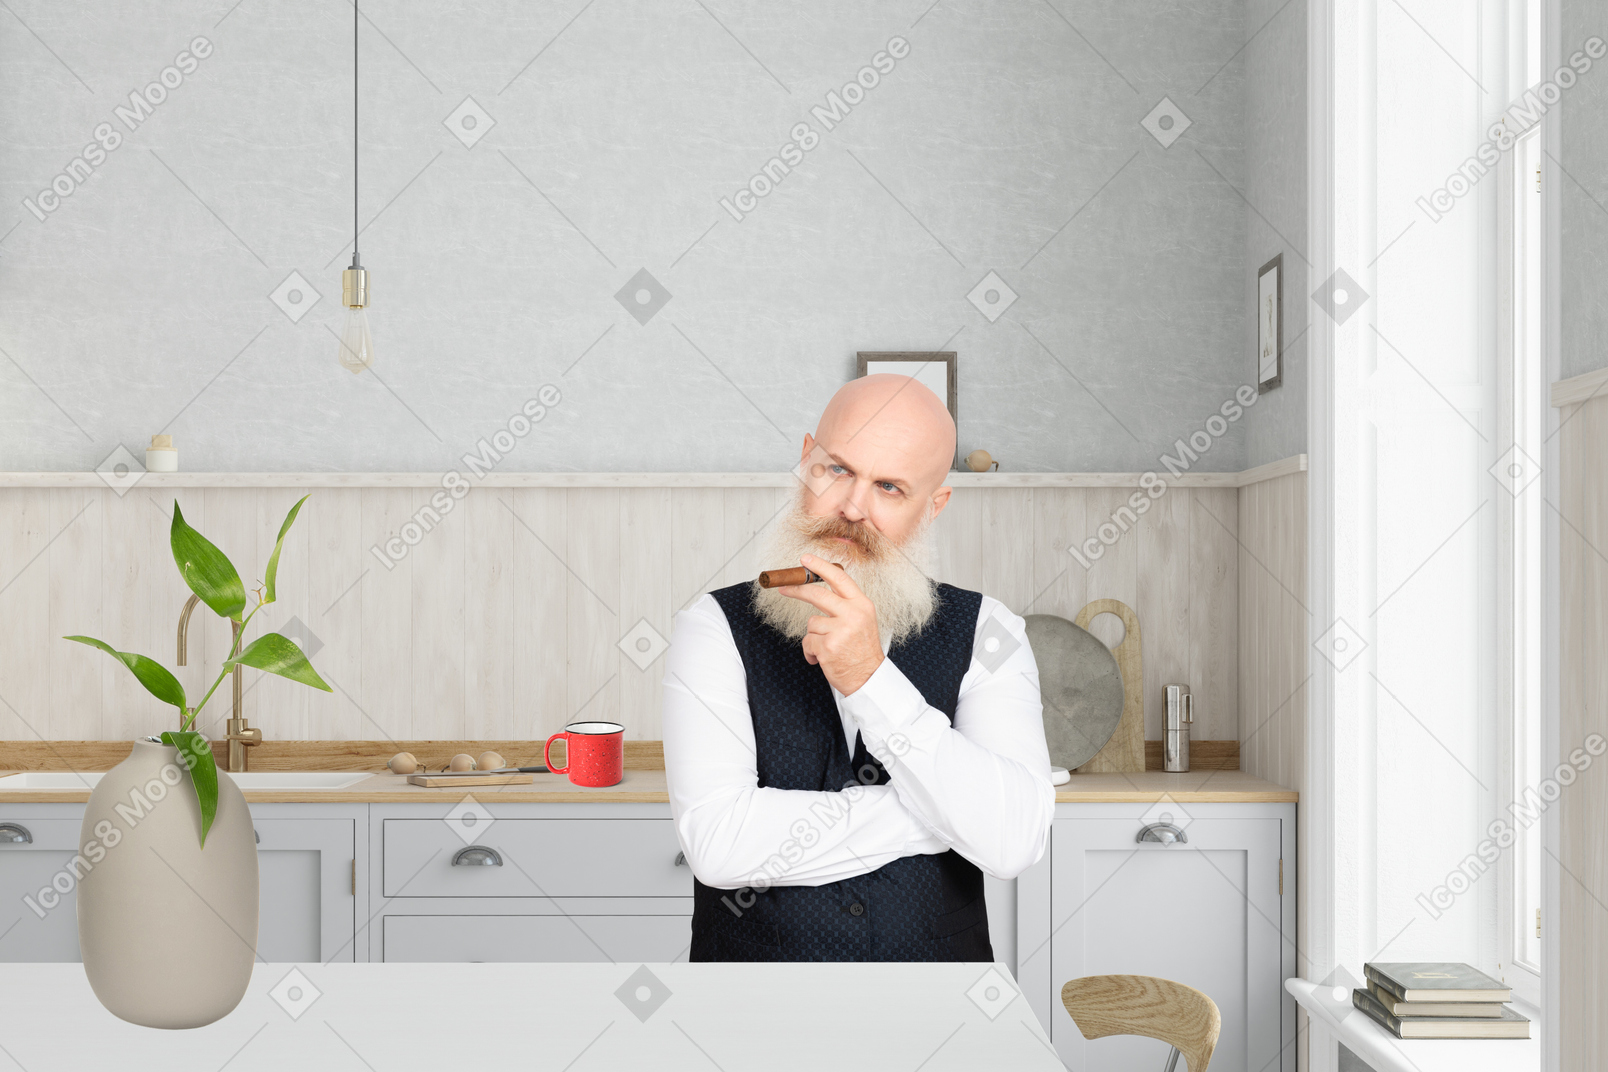 A man standing in a kitchen with a cup of coffee